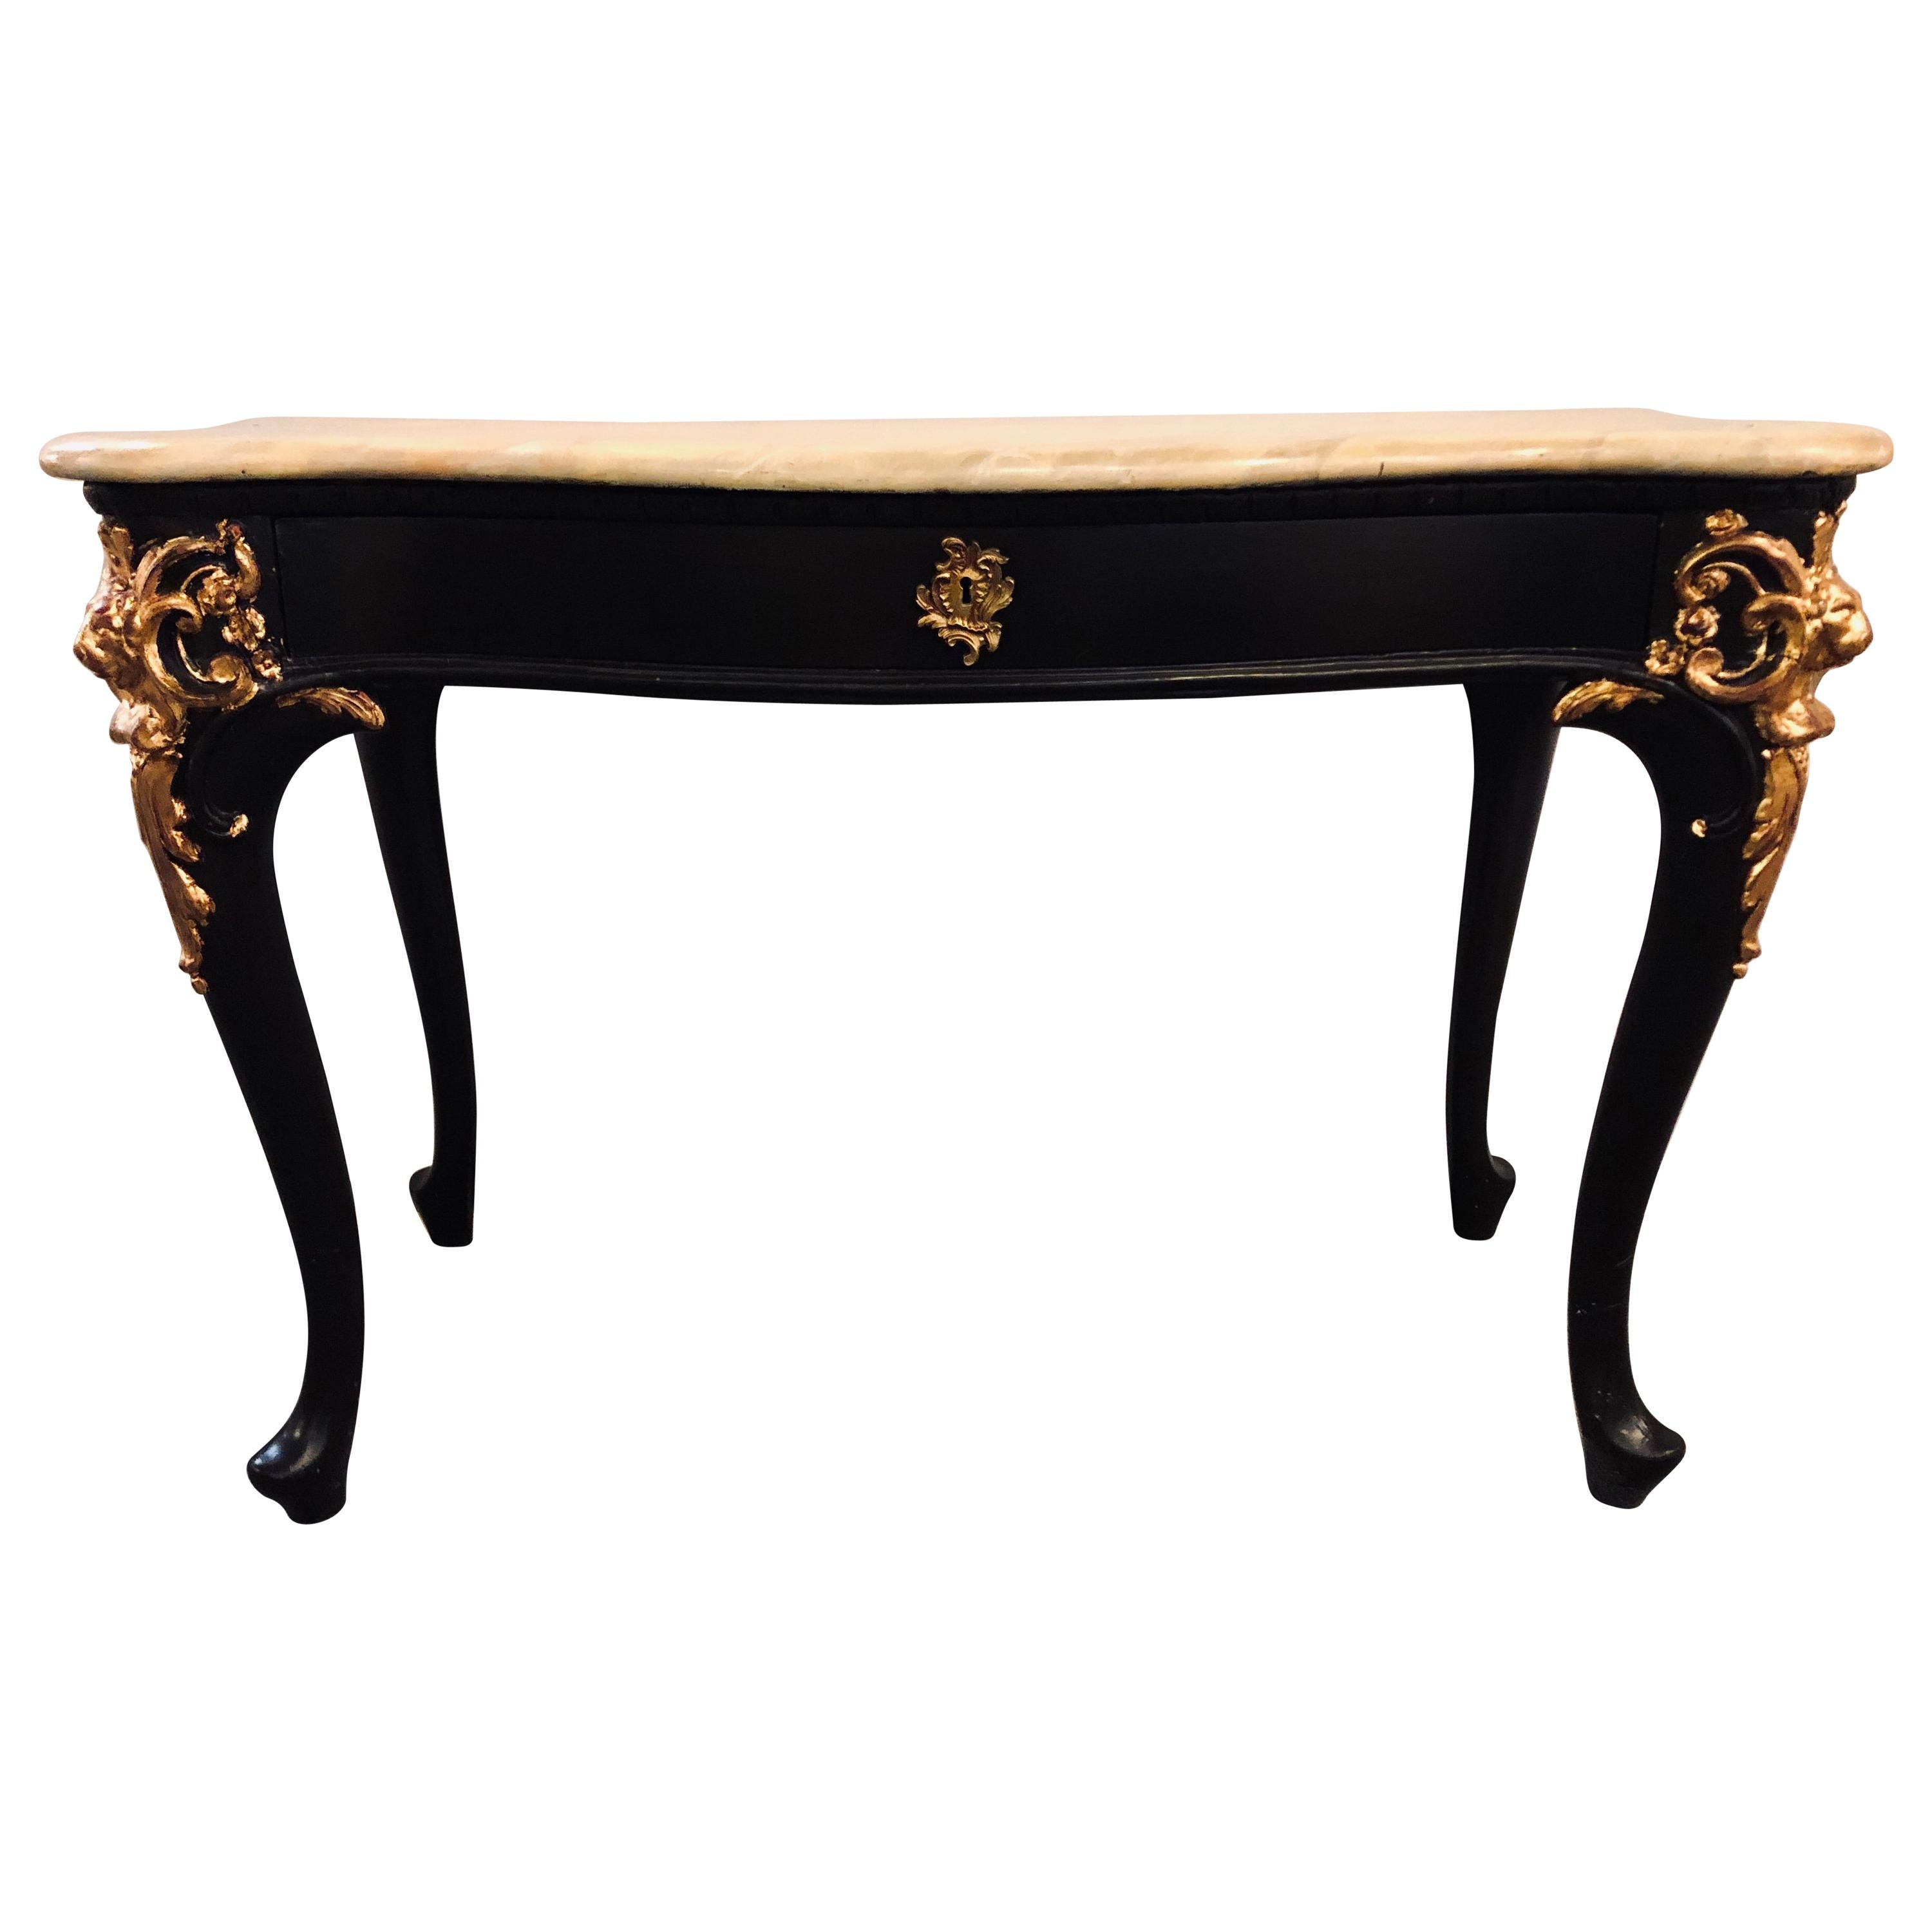 Fine Louis XV Style Ebony and Parcel Gilt Desk or Console or Serving Table